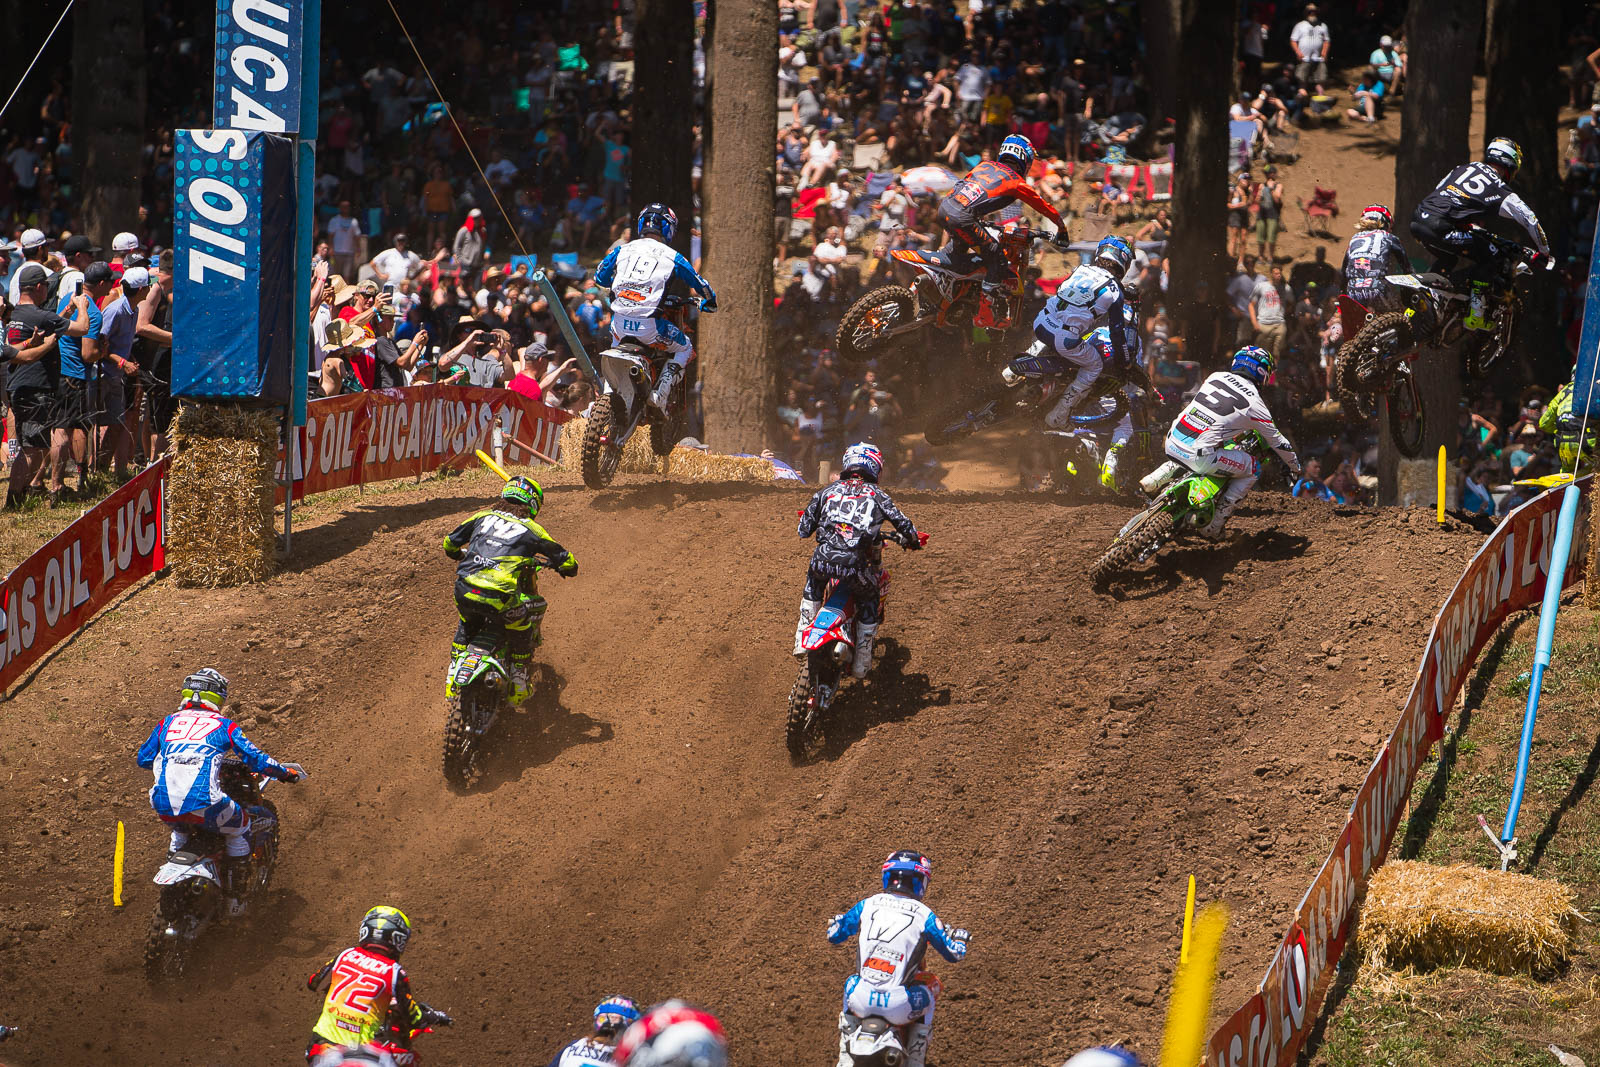 2021 Washougal Motocross Race Highlights and Results